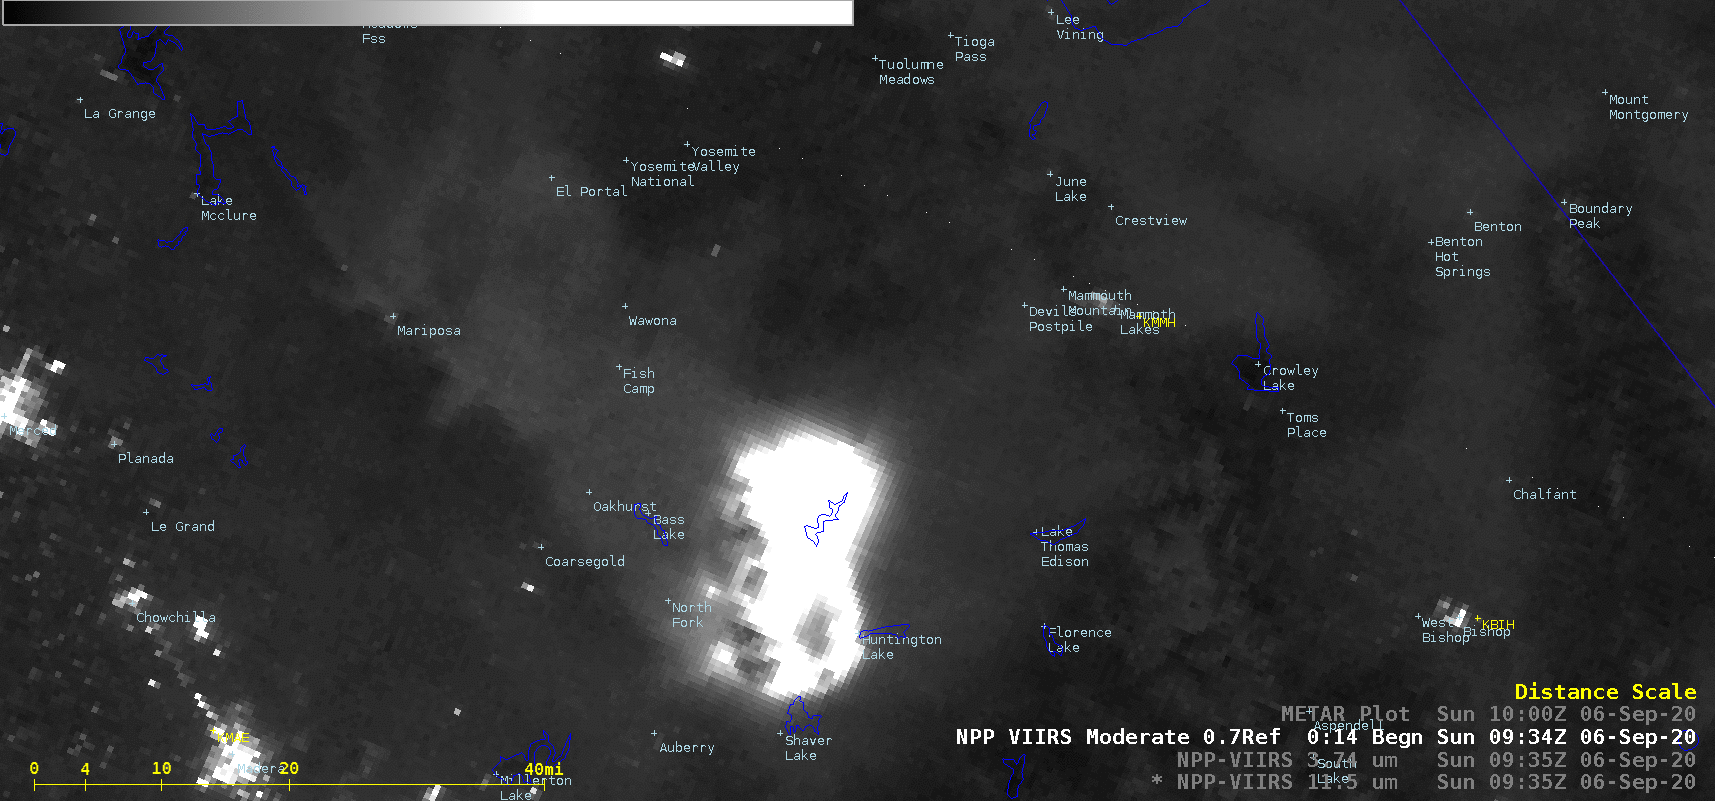 Suomi NPP VIIRS Day/Night Band (0.7 µm), Shortwave Infrared (3.74 µm) and Infrared Window (11.45 µm) images